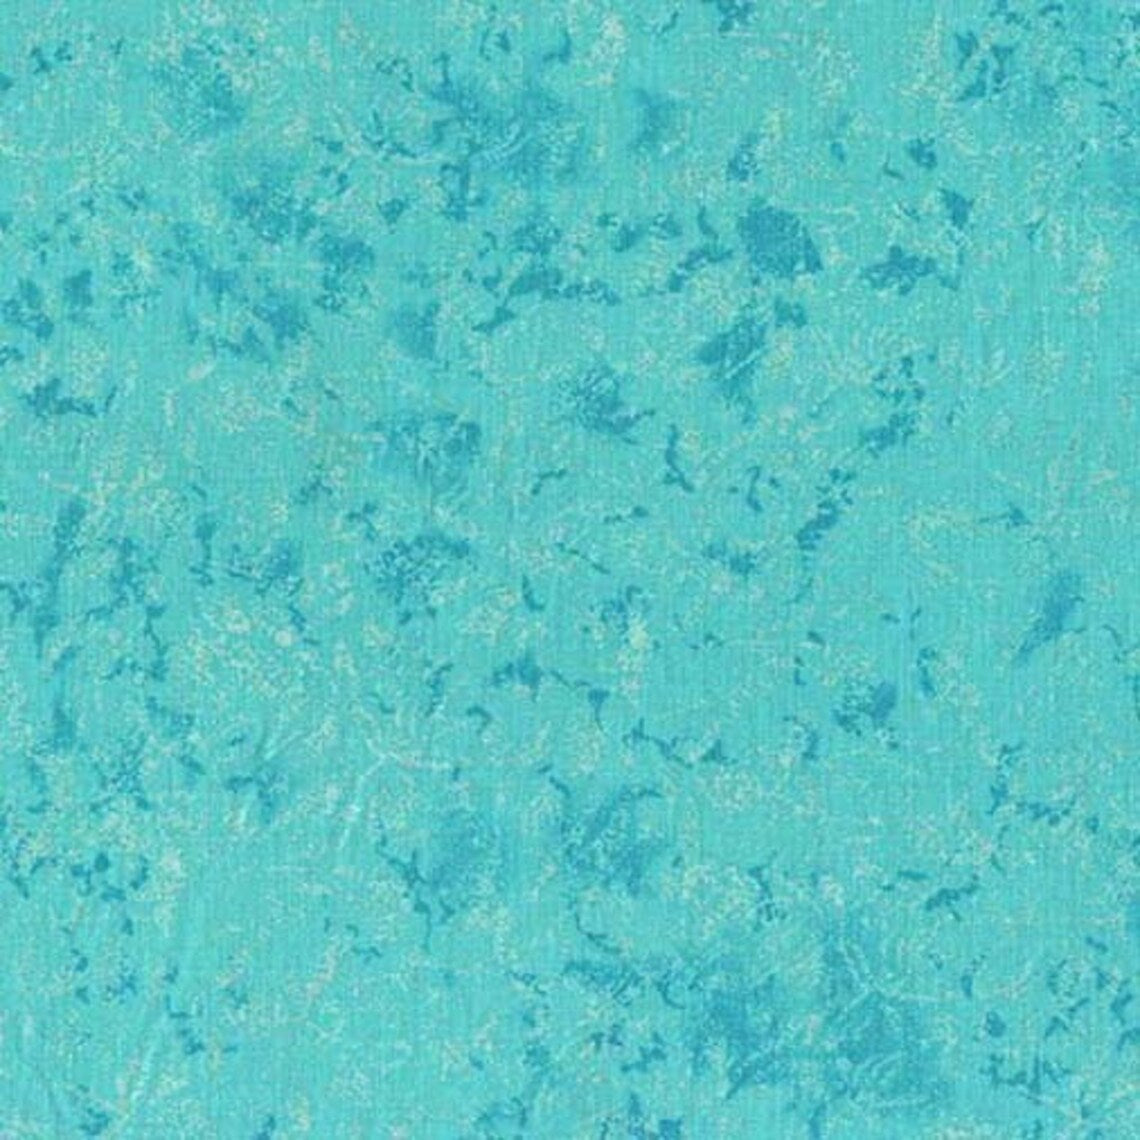 TEAL "WHIRLPOOL" FAIRY FROST METALLIC GLITTER cotton fabric by the half yard MICHAEL MILLER!